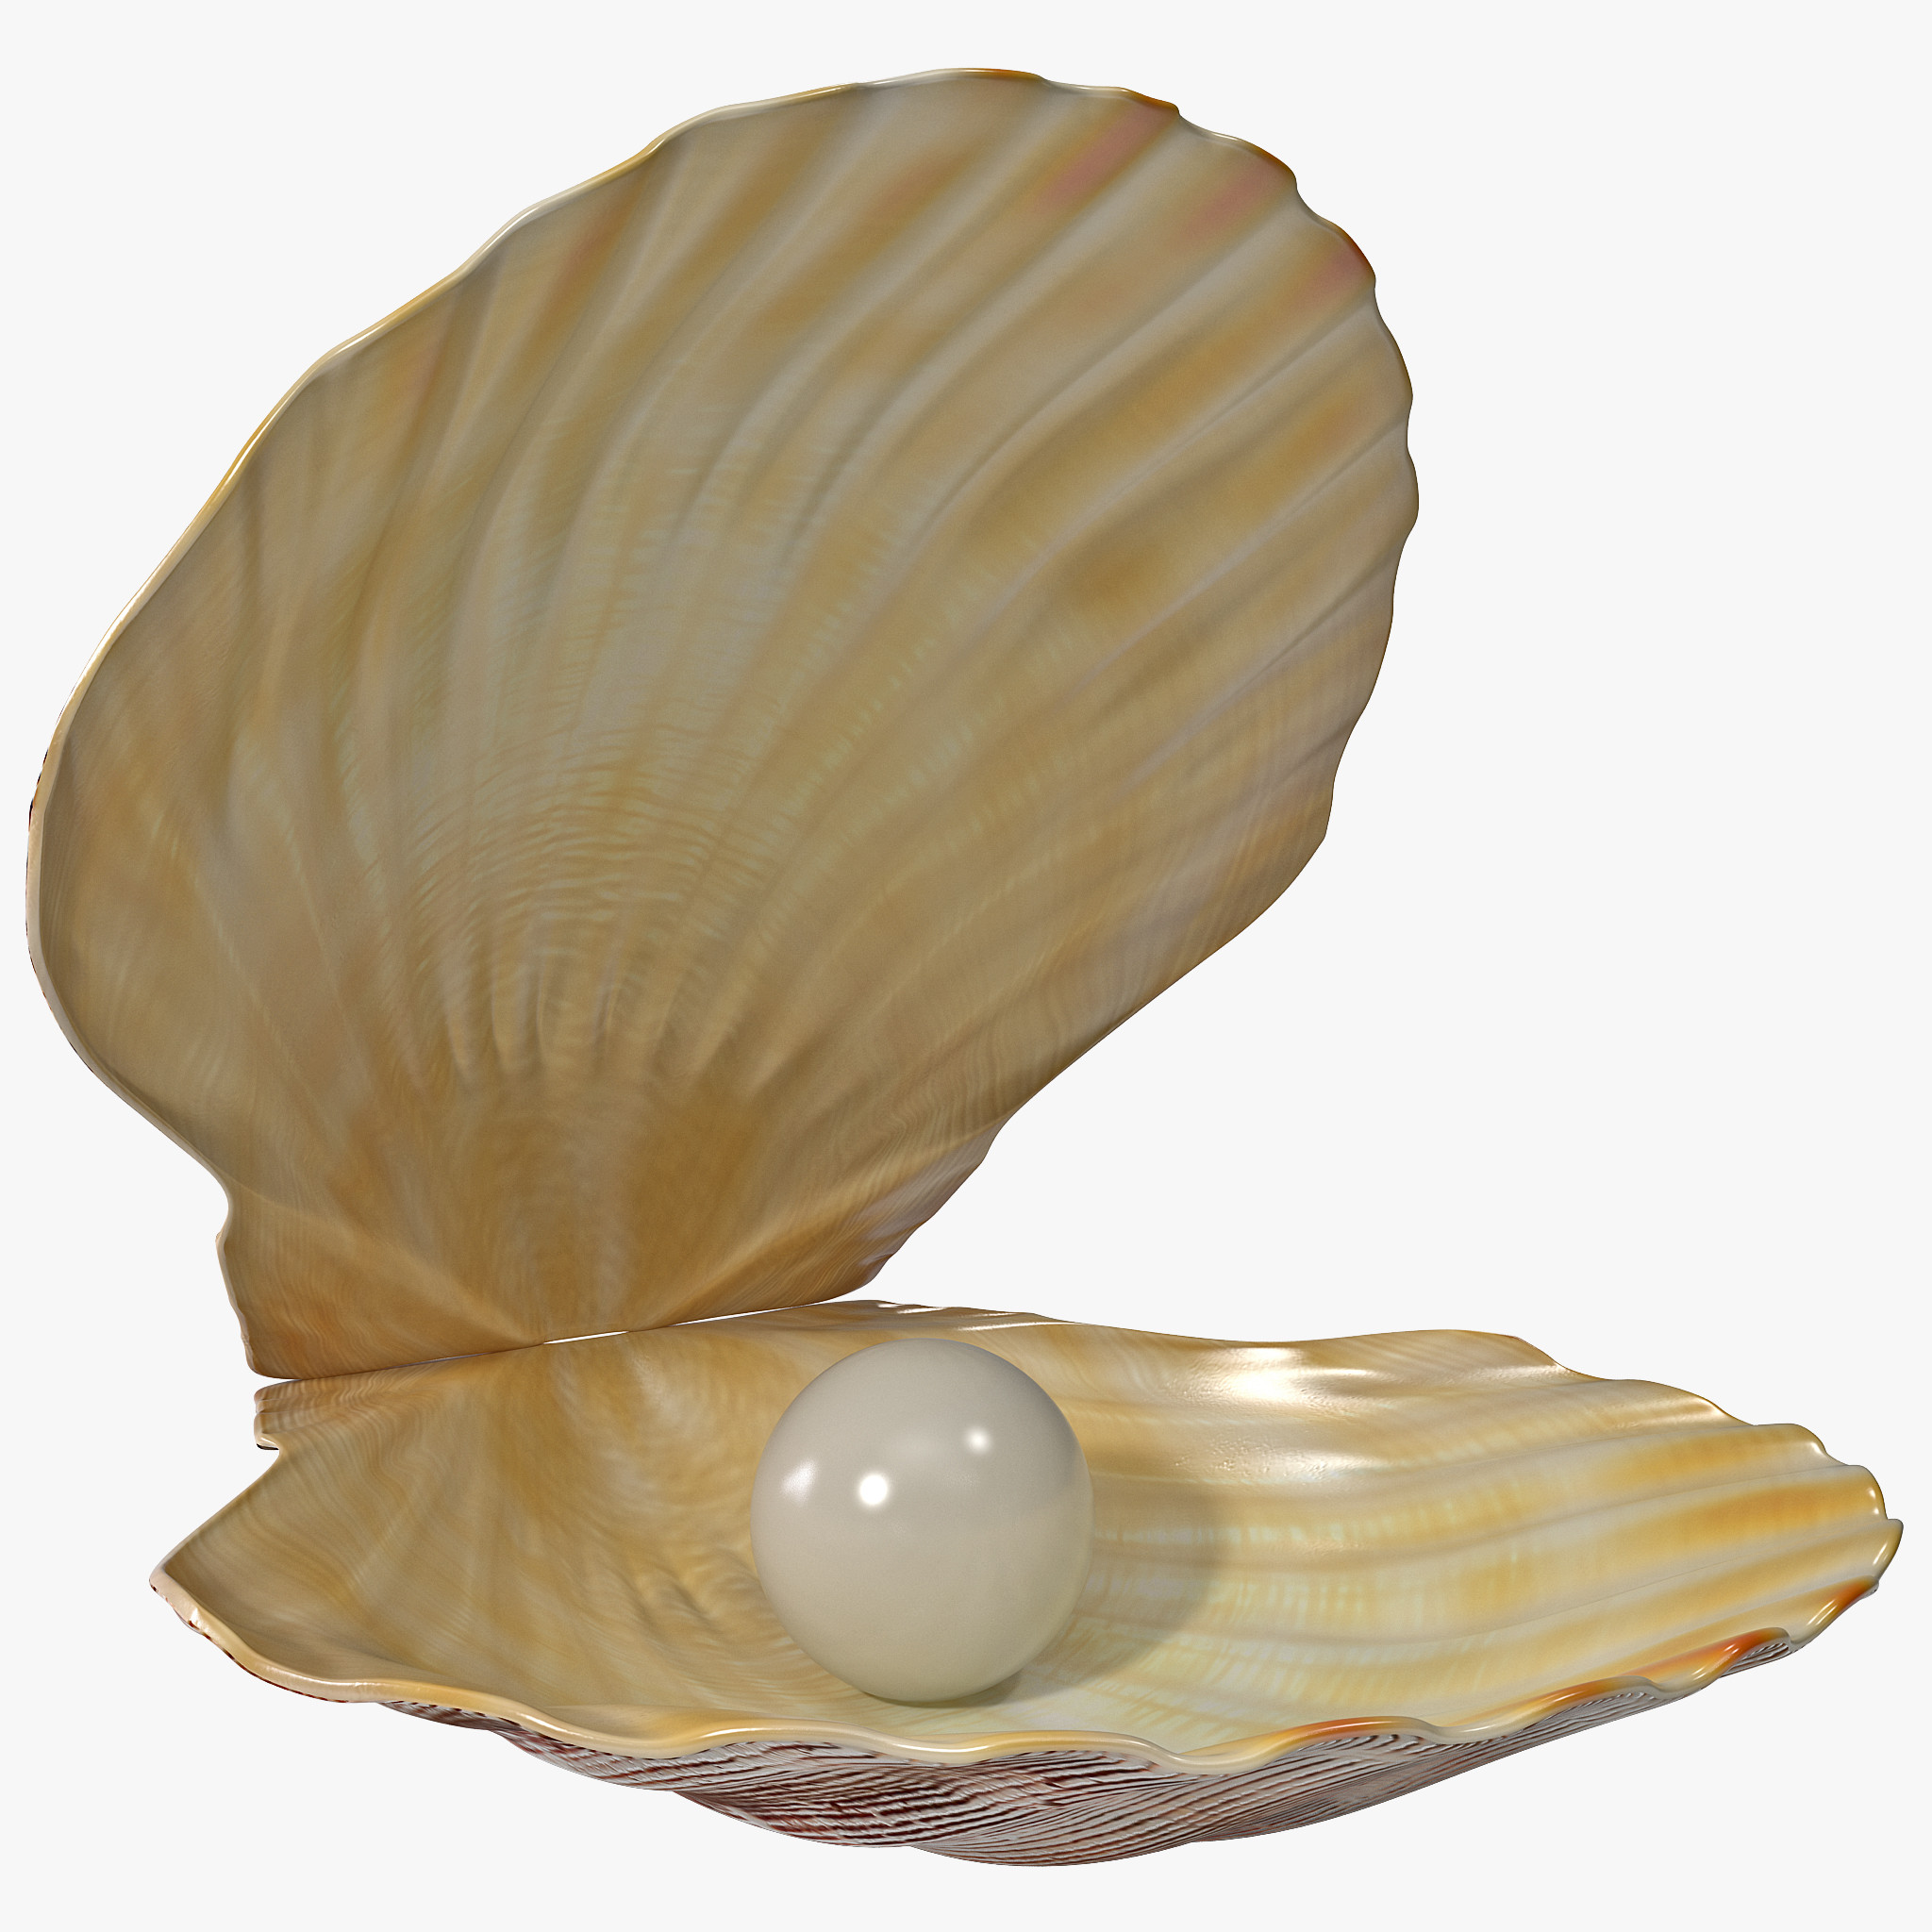 Open Oyster PNG-PlusPNG.com-1